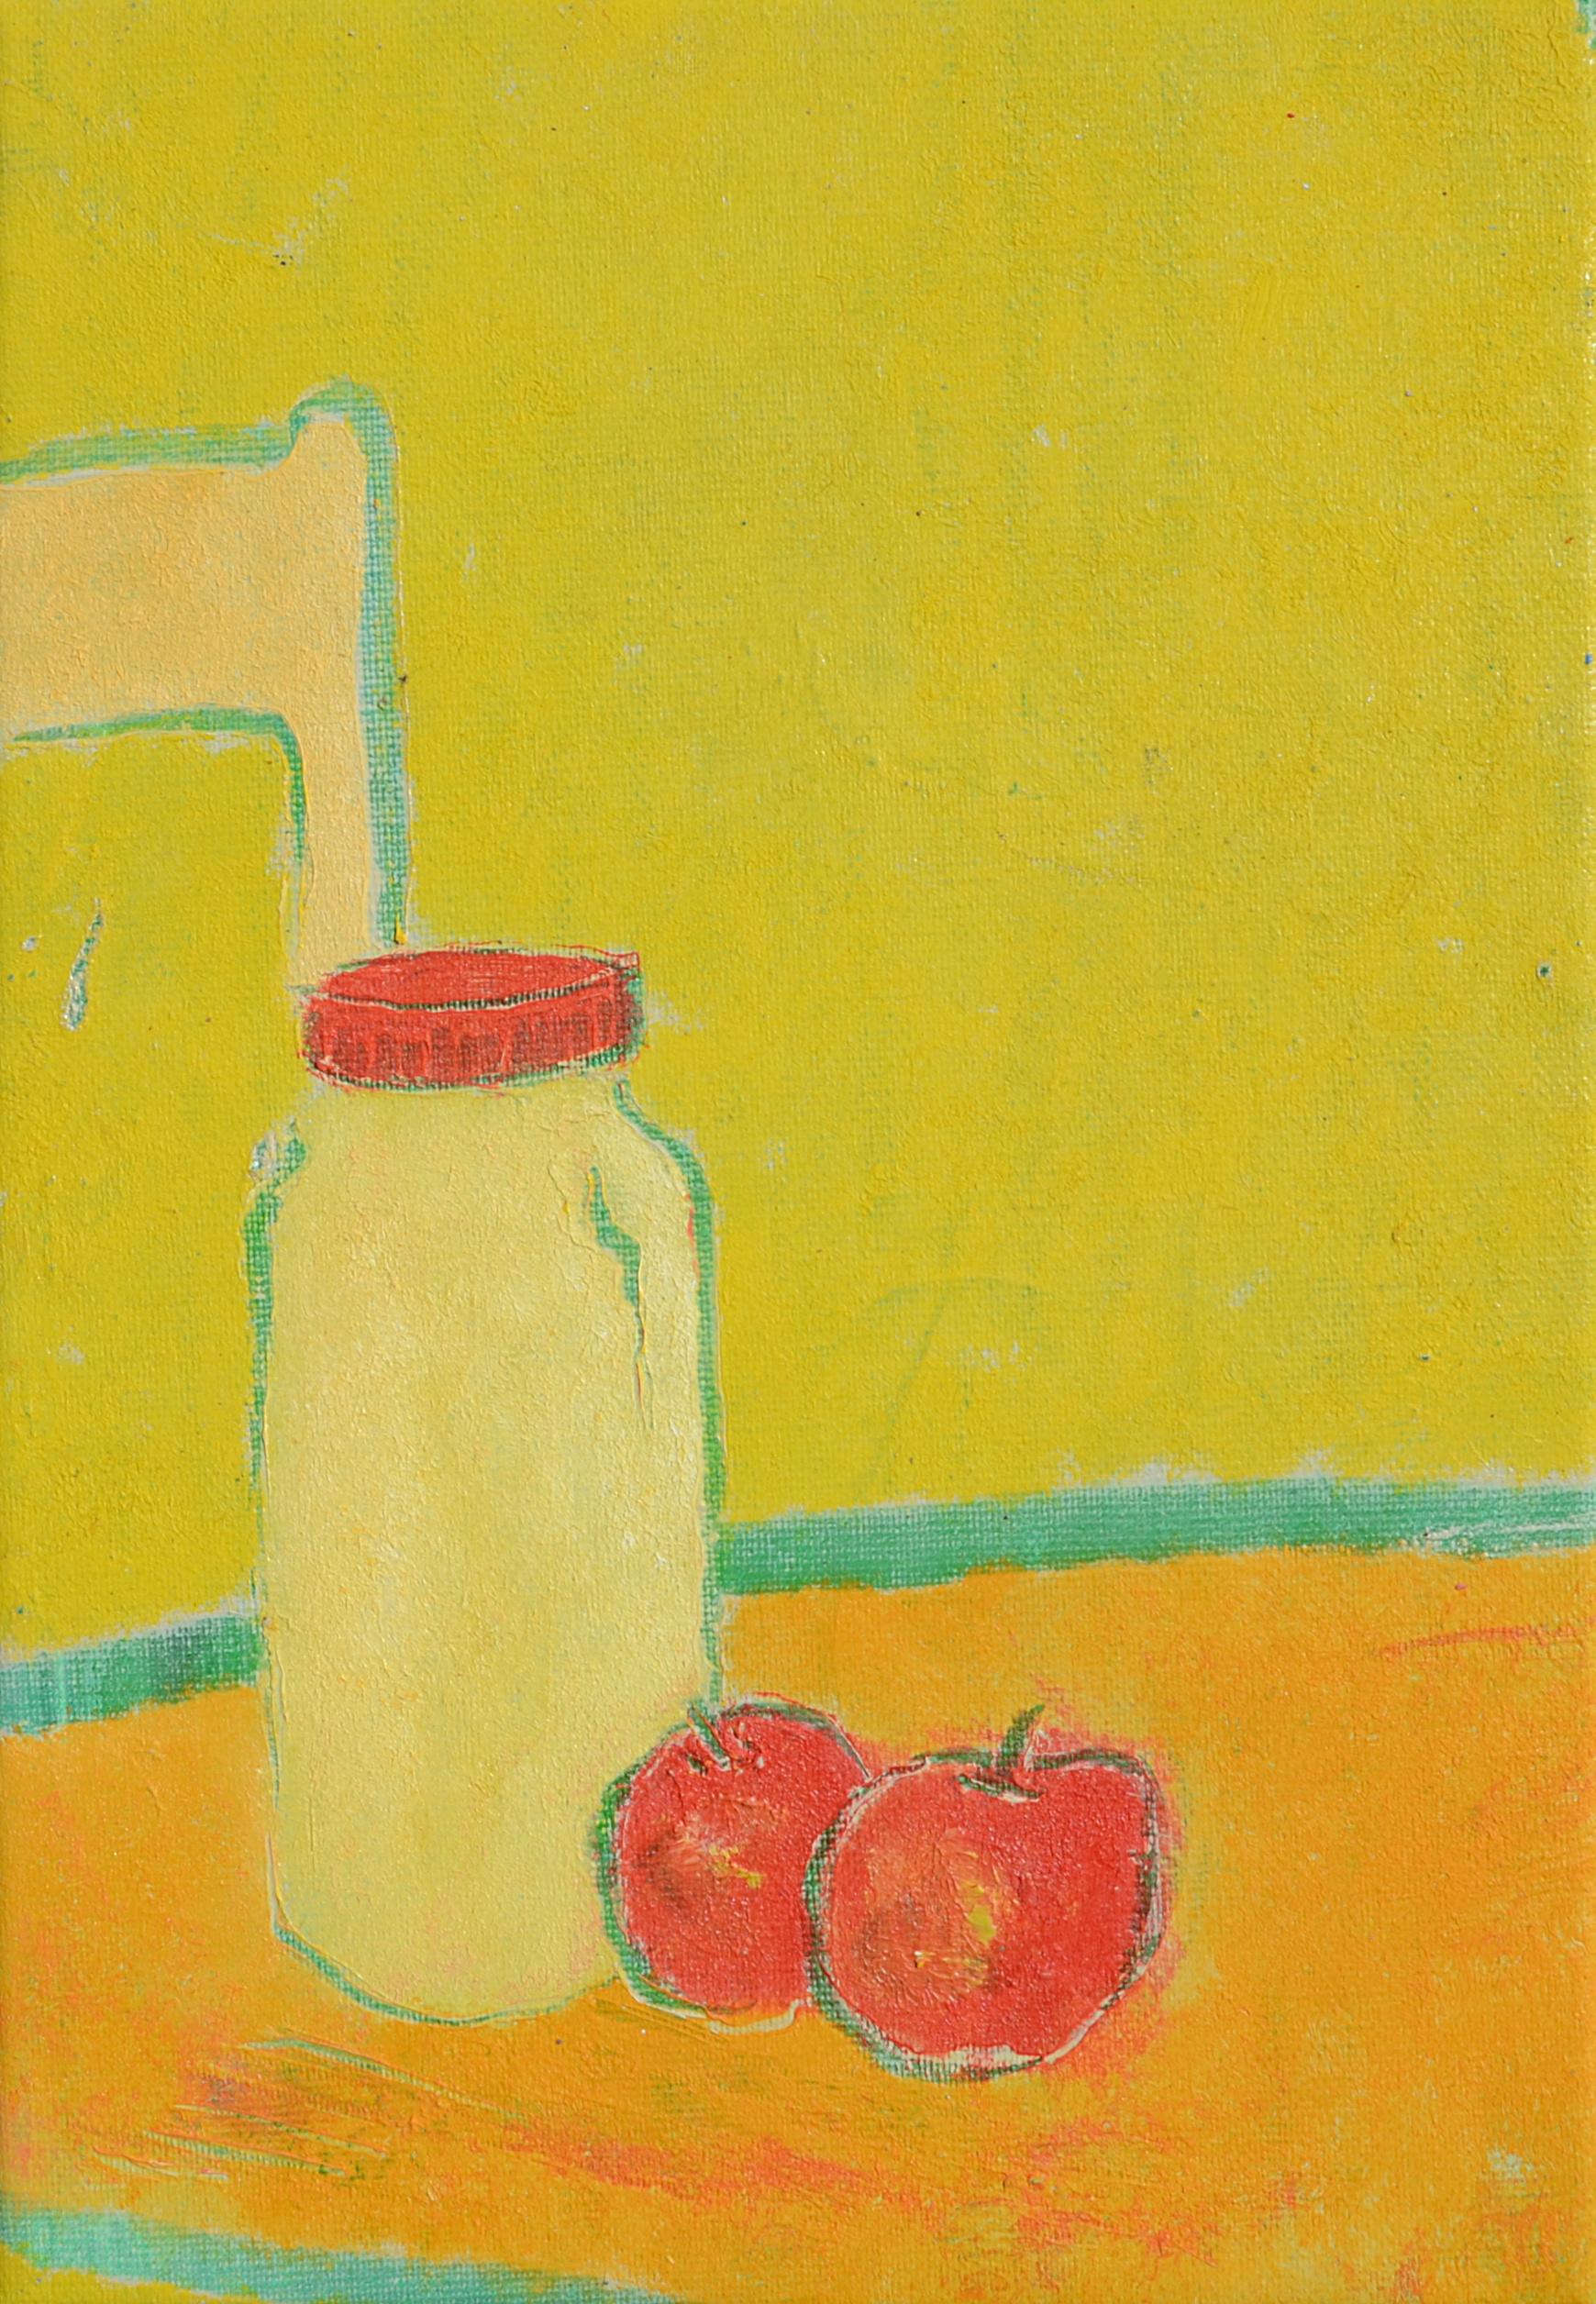 Antoine Henry Still-Life Painting - Yum ("Miam"), Milk Bottle and Red Apples on Orange Table and Yellow Background